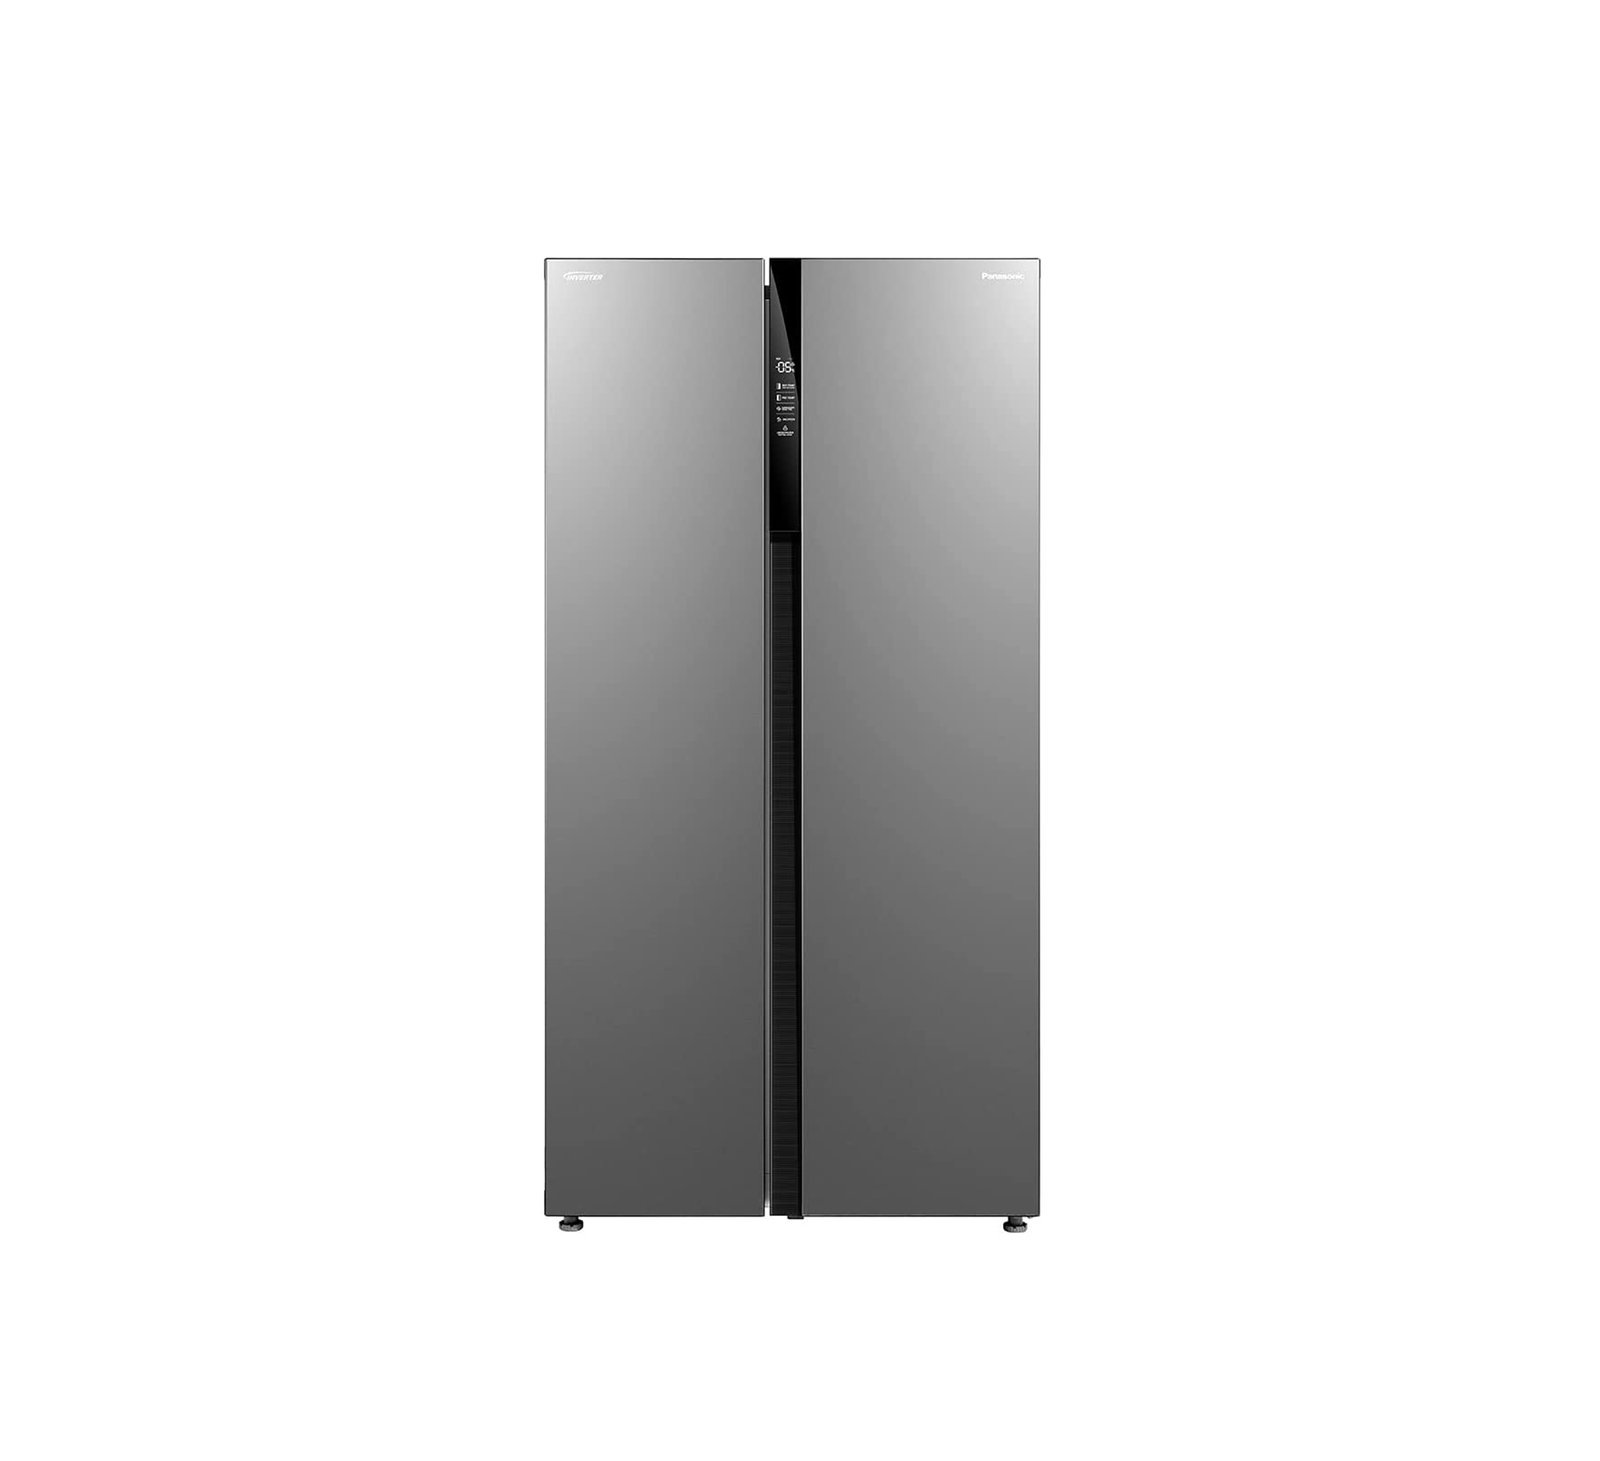 Panasonic 700 Liter Side By Side Refrigerator Stainless Steel Finish Model-NRBS703MS | 1 Year Full 10 Year Compressor Warranty.